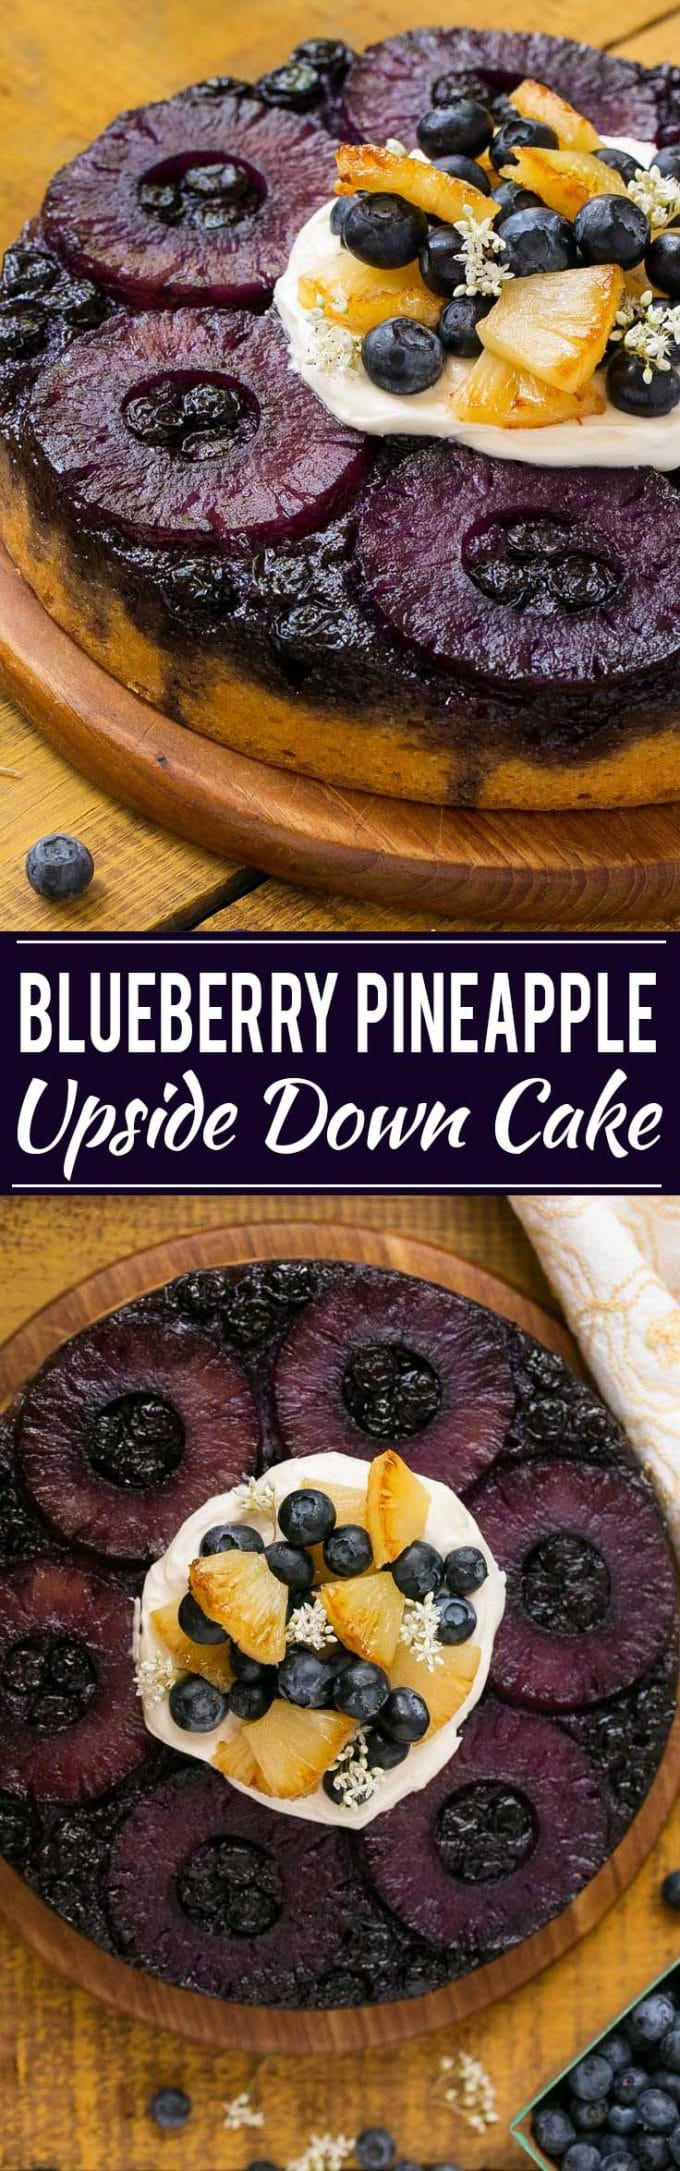 Blueberry Upside Down Cake
 Blueberry Pineapple Upside Down Cake Dinner at the Zoo